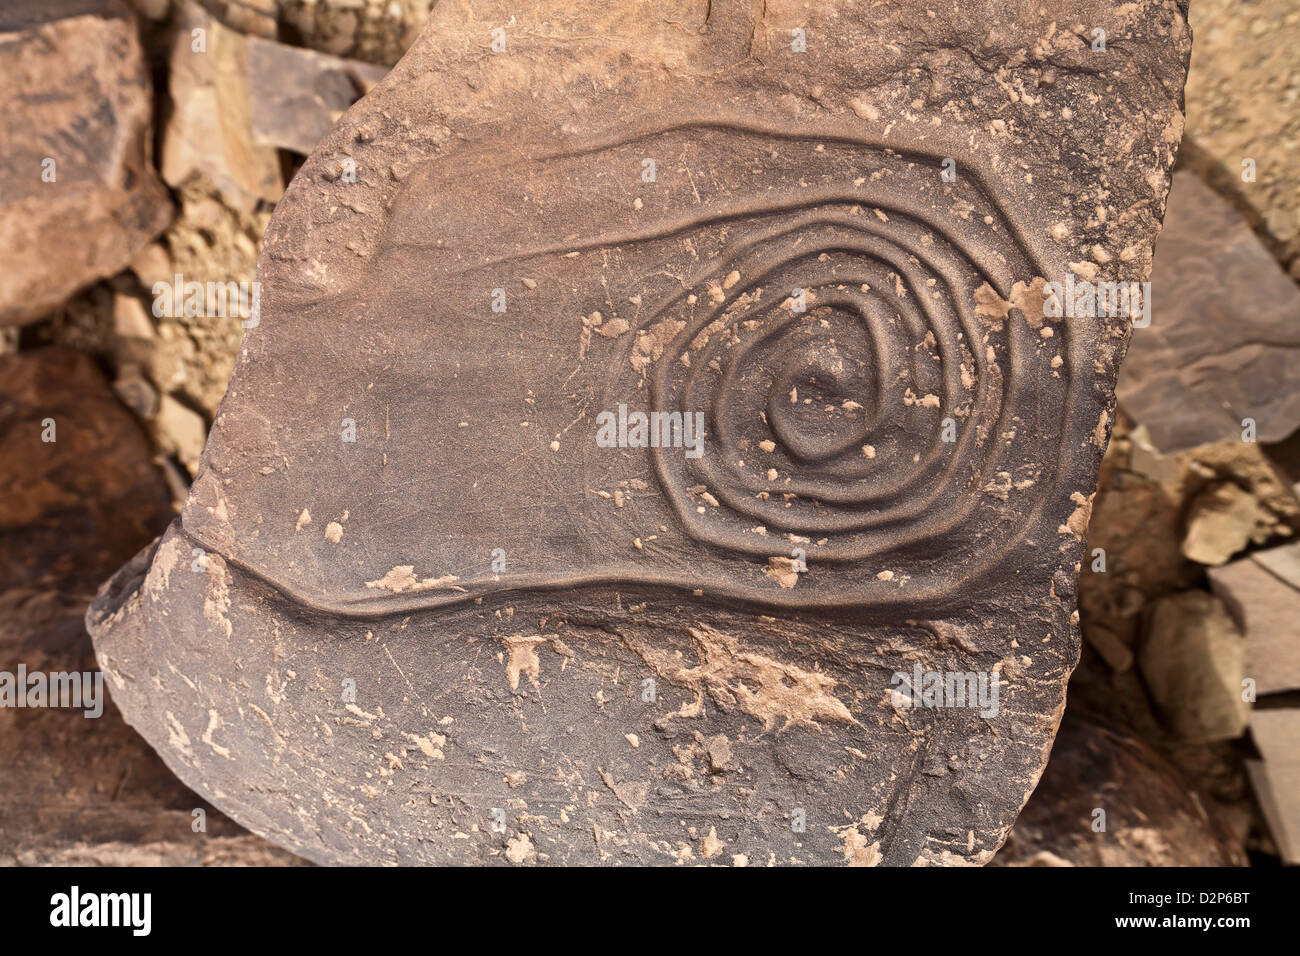 Prehistoric rock art site Ait Ouazik, Morocco, North Africa Stock Photo